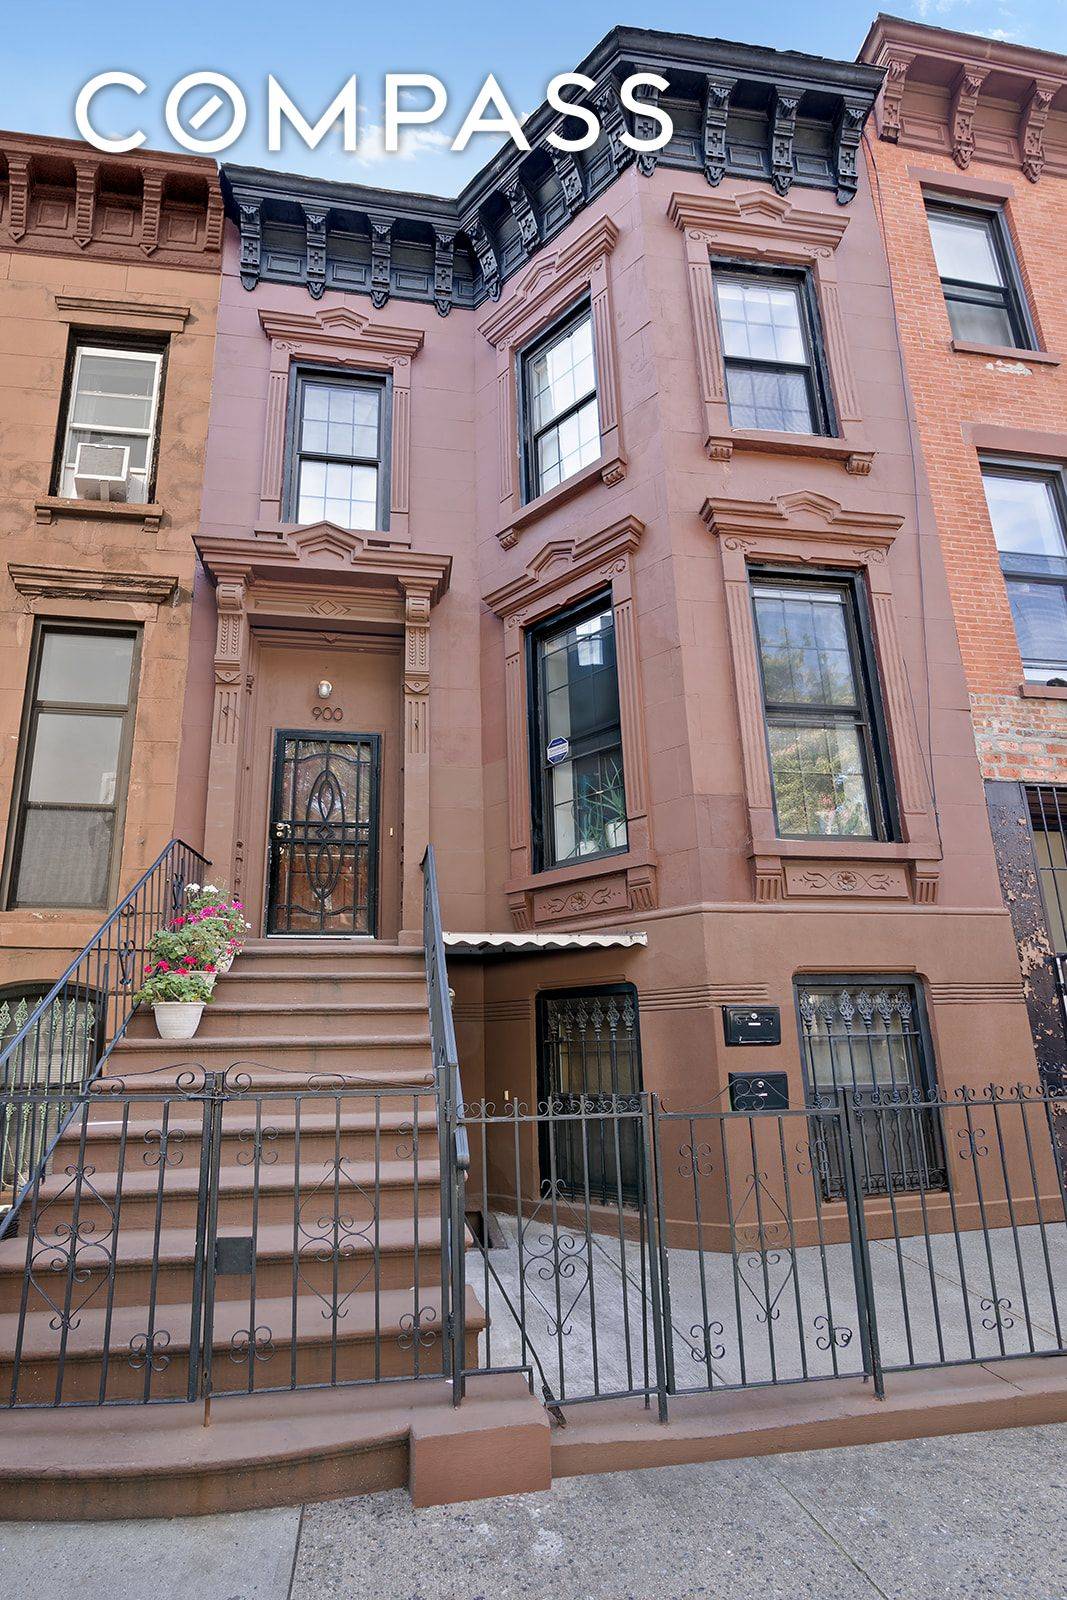 Welcome to 900 Lafayette Ave, a stunning multi family townhouse located in the heart of Stuyvesant Heights.